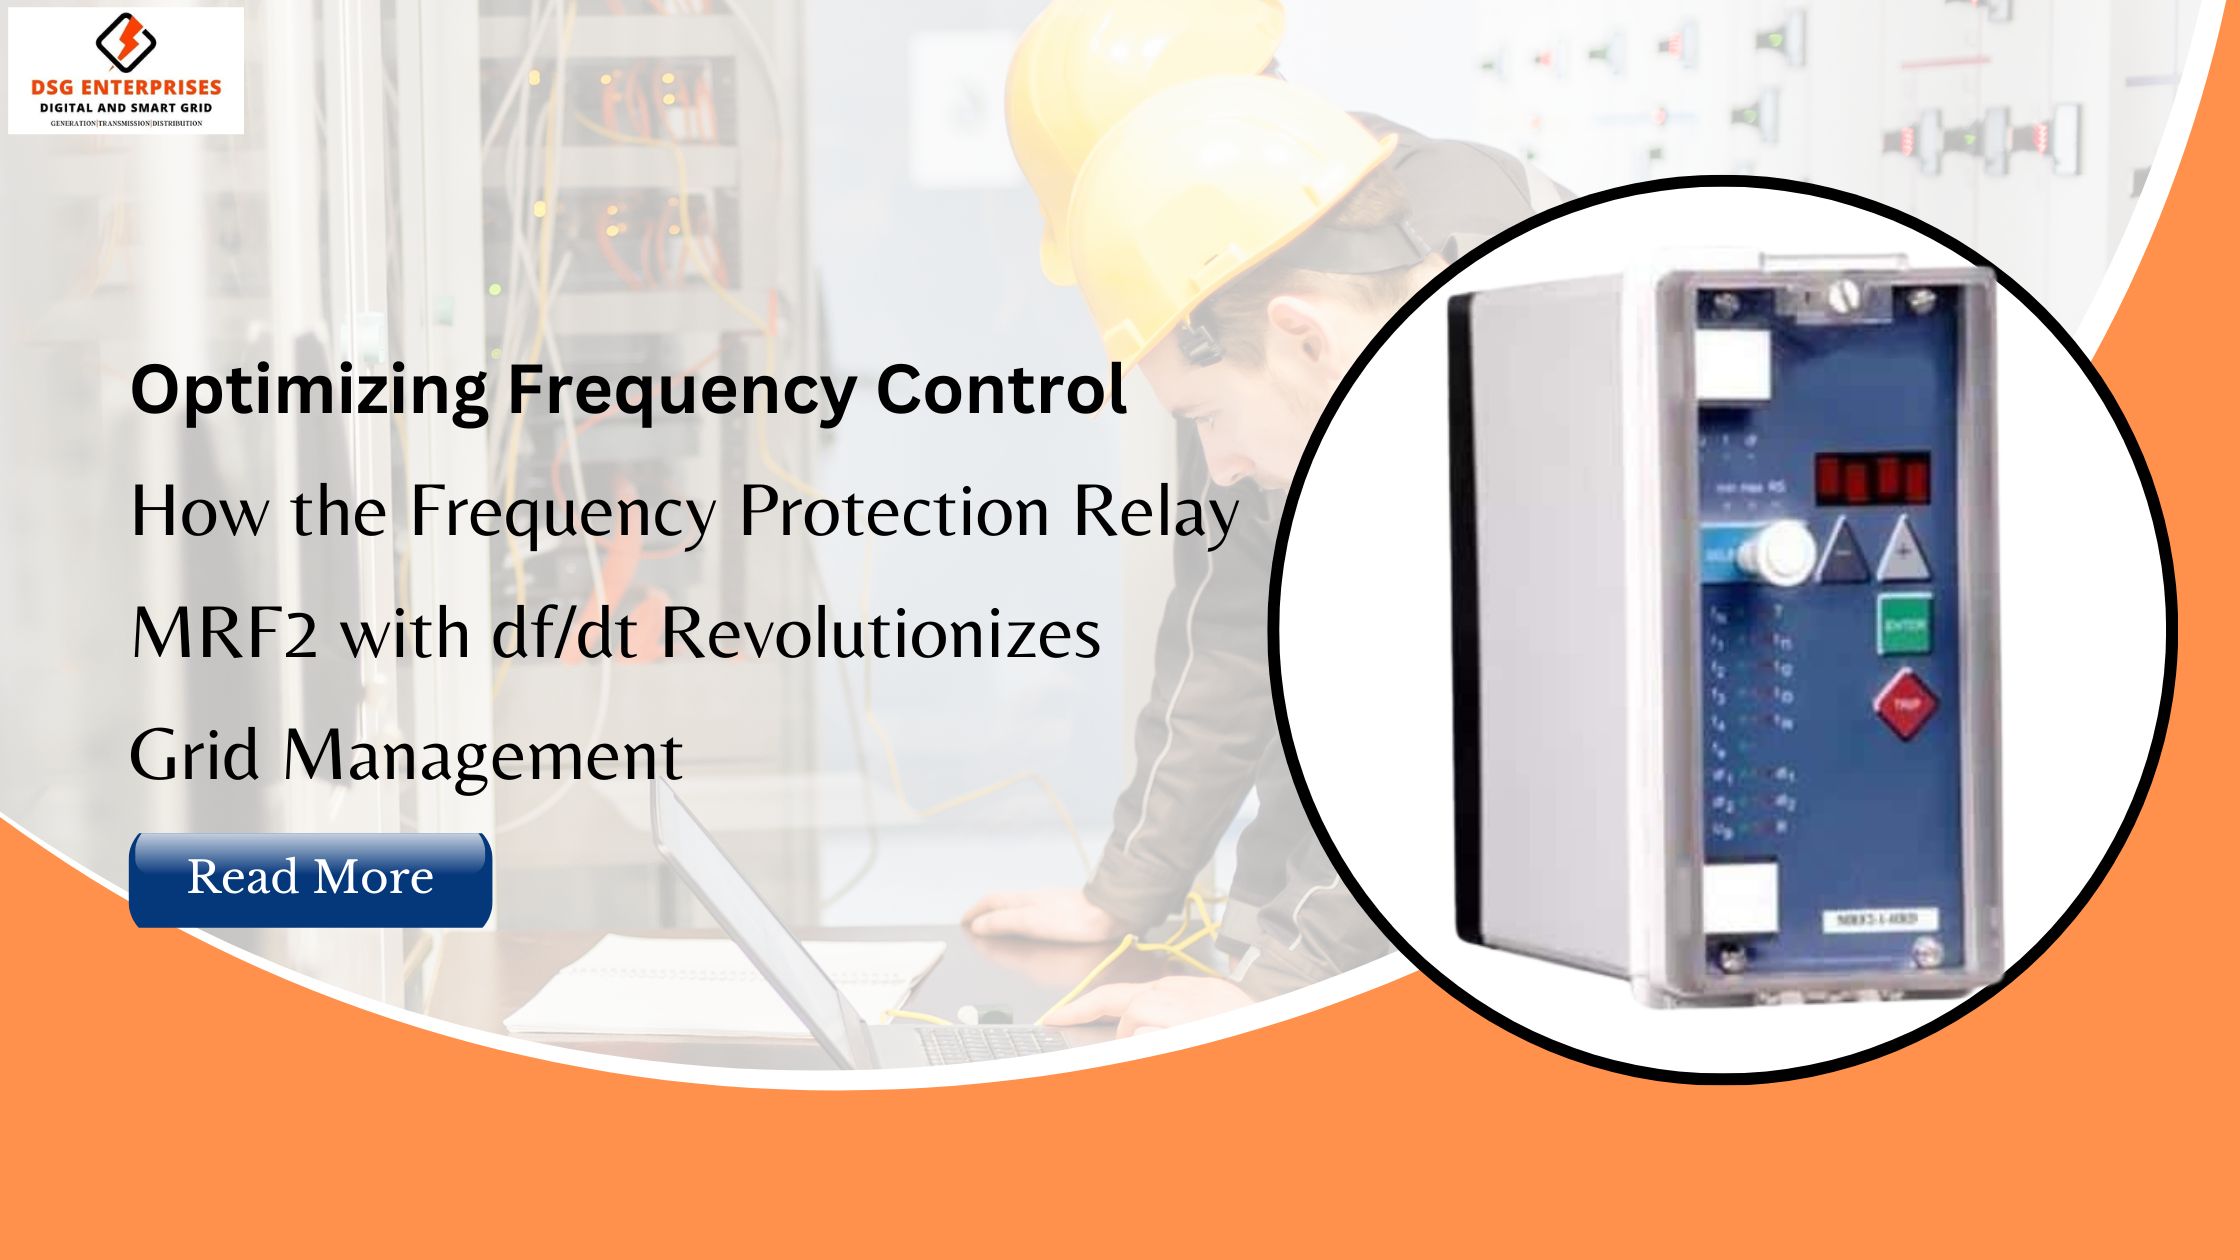 You are currently viewing Optimizing Frequency Control: How the Frequency Protection Relay MRF2 with df/dt Revolutionizes Grid Management